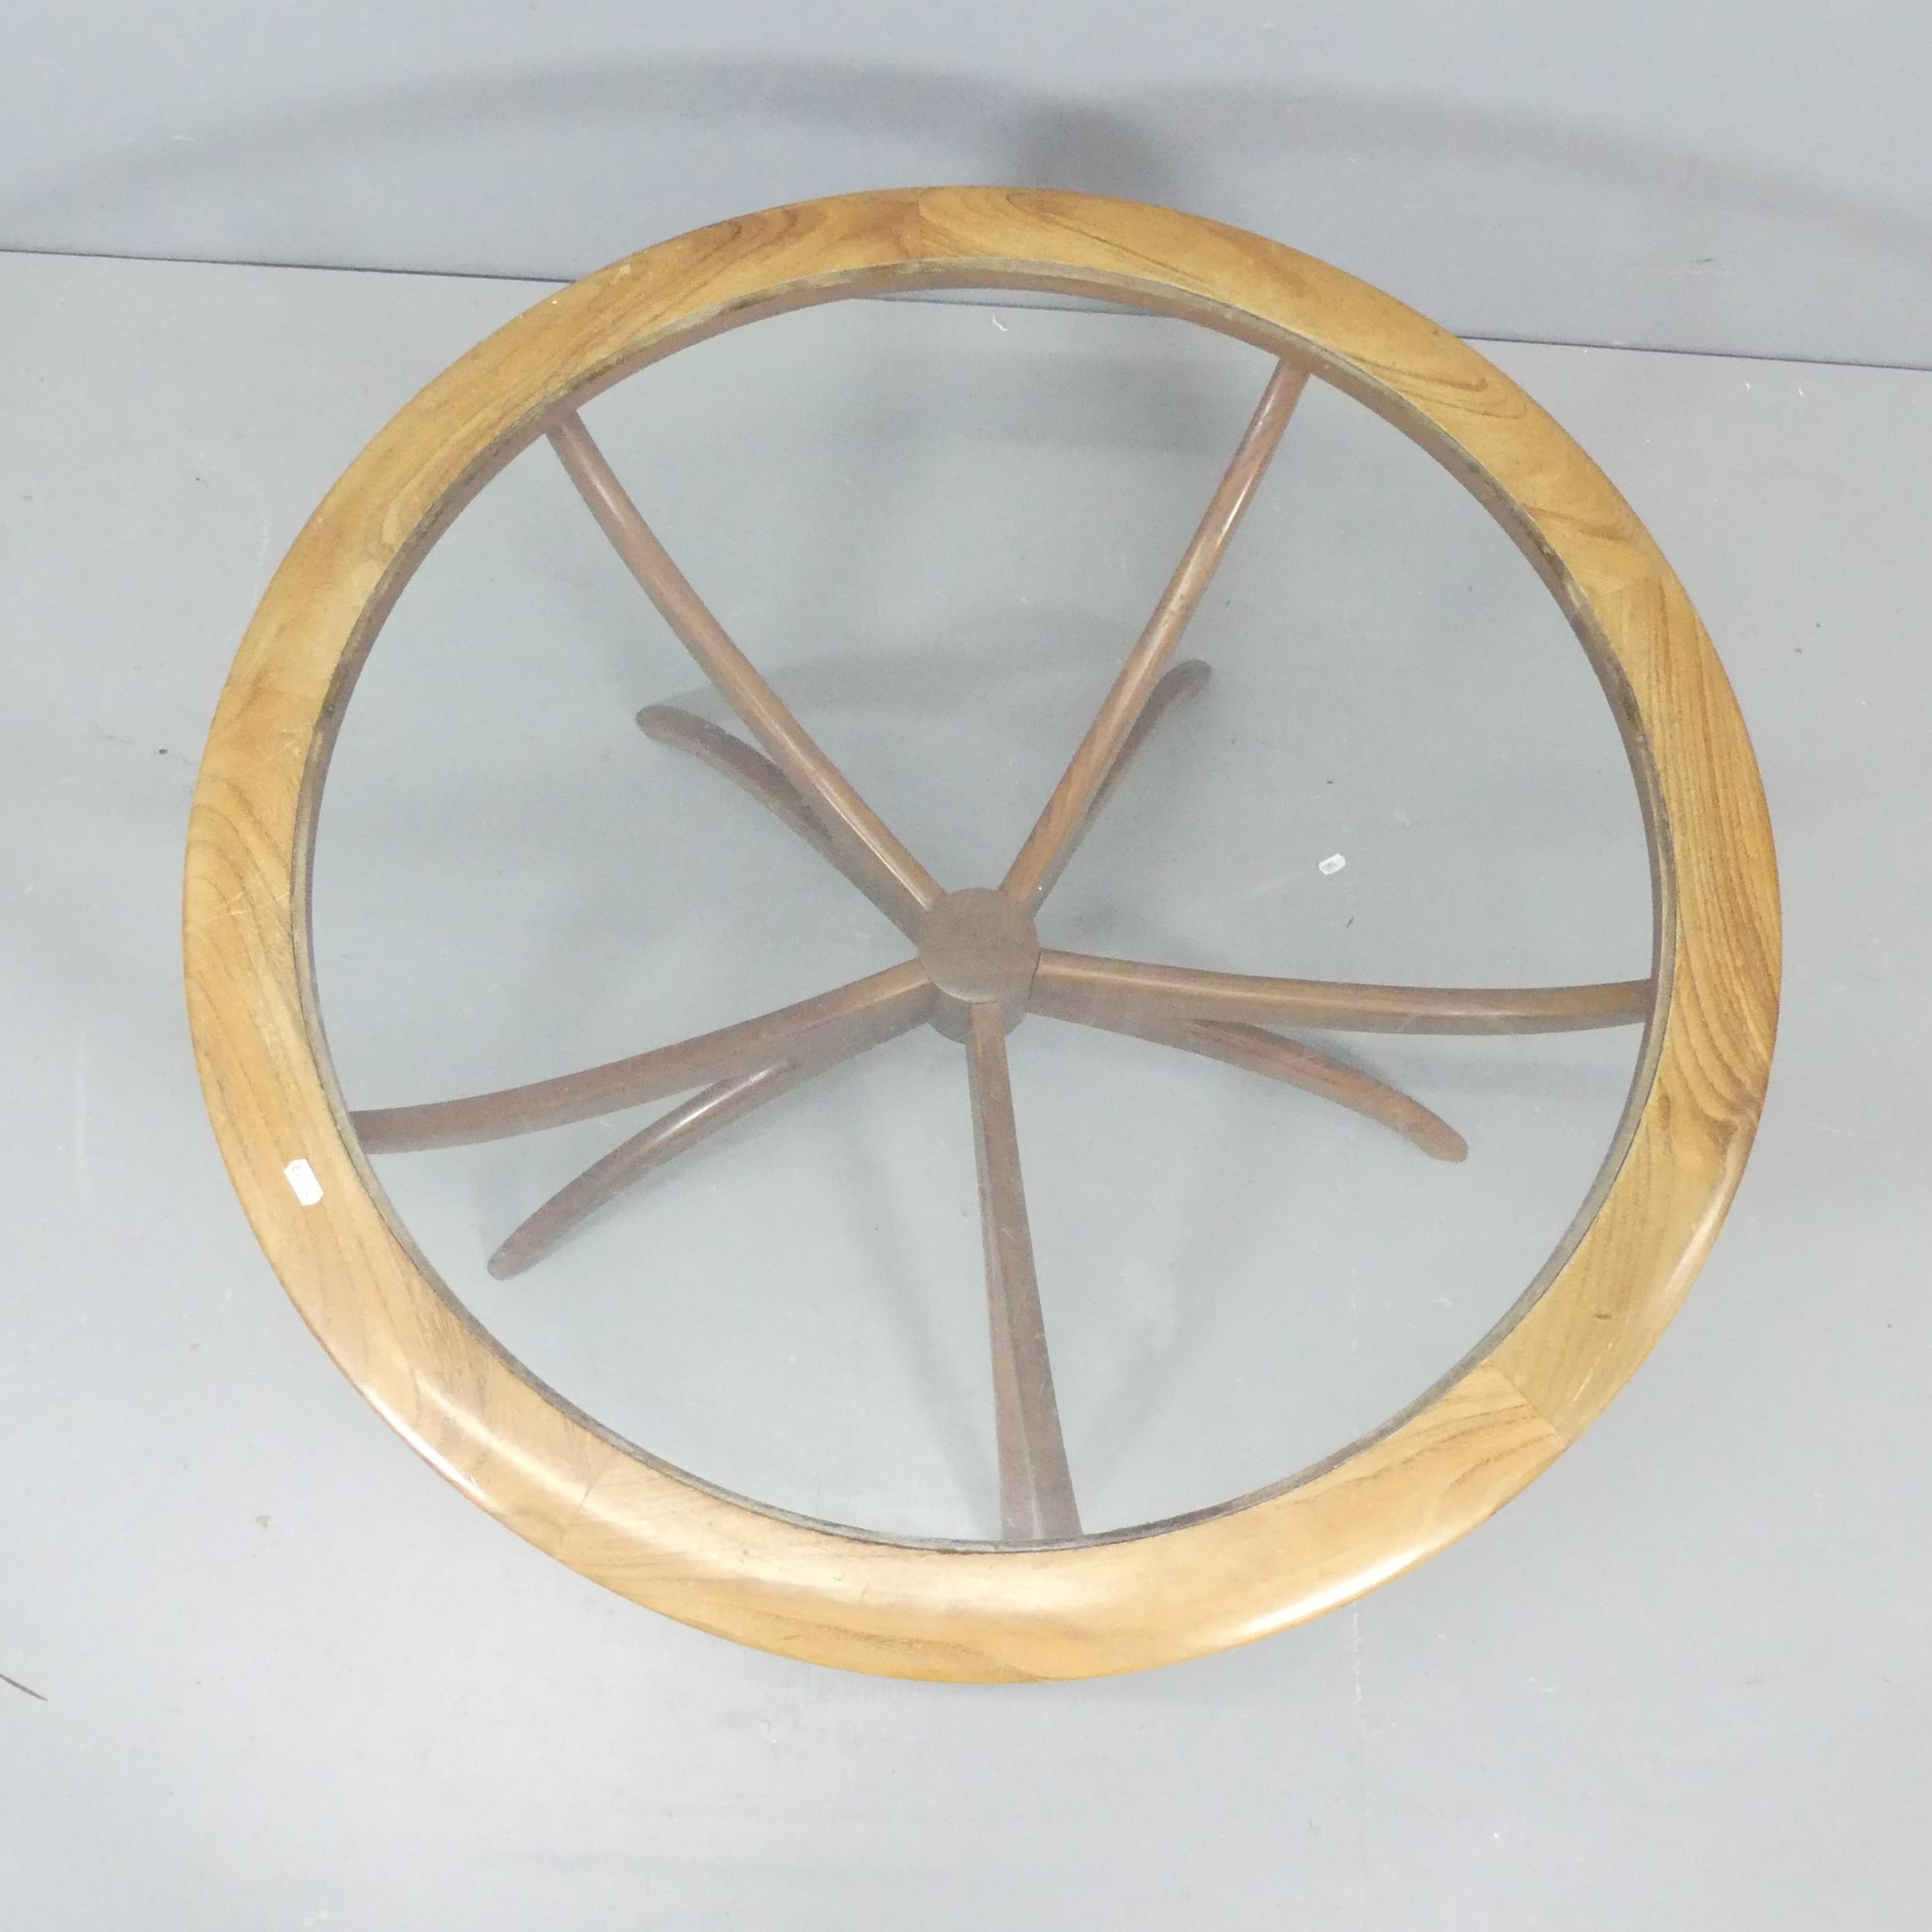 G-PLAN - A mid-century Astro Spider circular coffee table, with inset glass top and teak frame. - Image 2 of 3